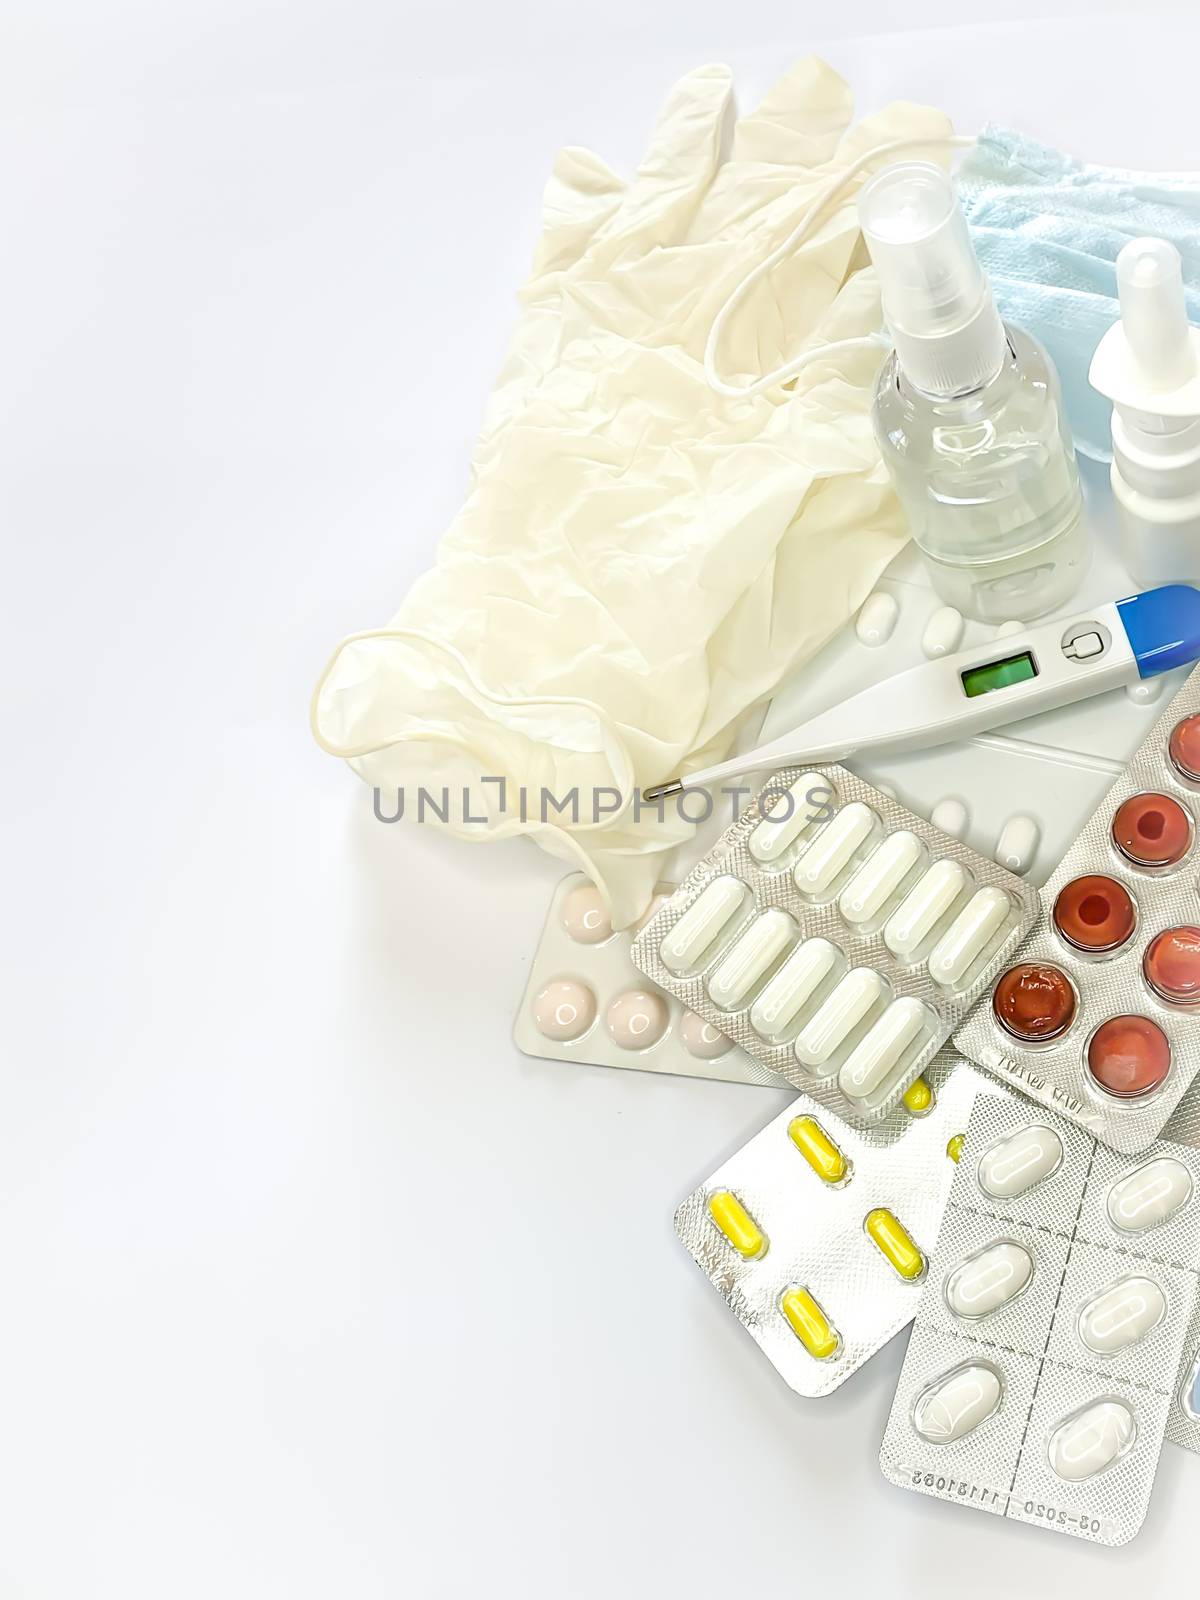 Different medicines: tablets, pills in blister pack, medications drugs, medical gloves, mask, syringe, thermometer, spray, sanitizer on a white background. Vertical photo with space for text